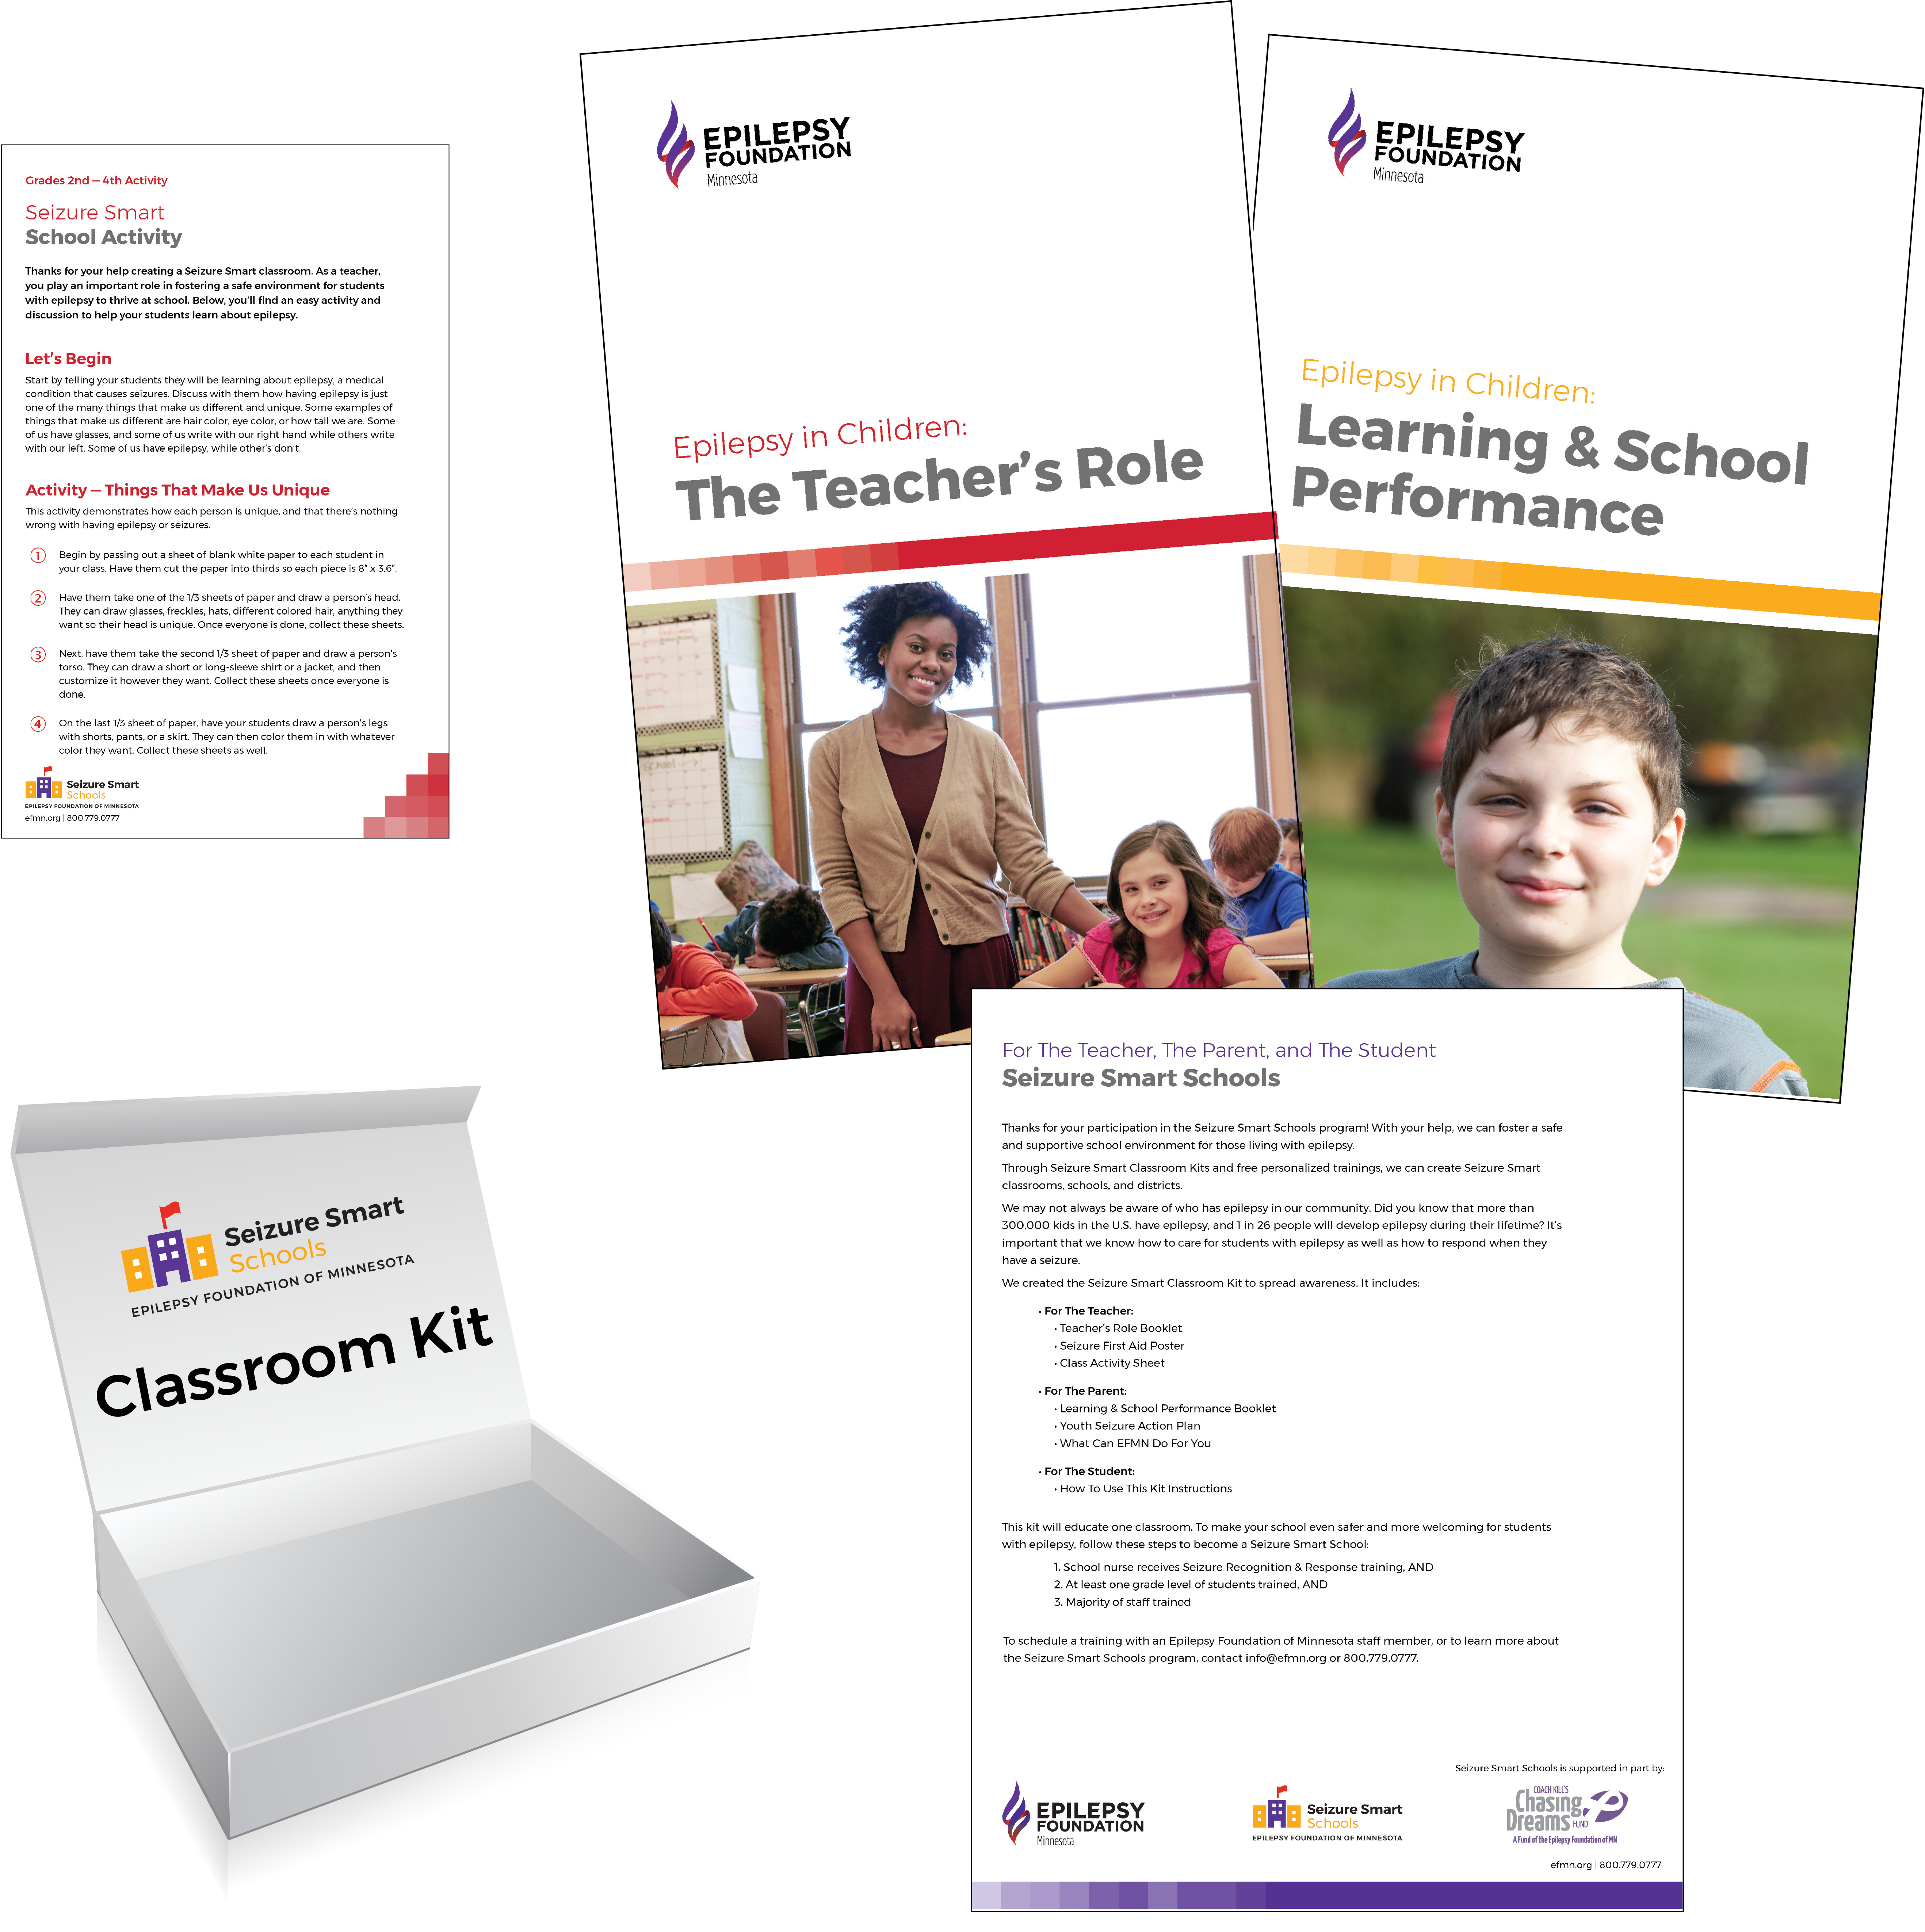 Contents of Classroom Kit with booklets for teachers and parents to understand epilepsy in the classroom.